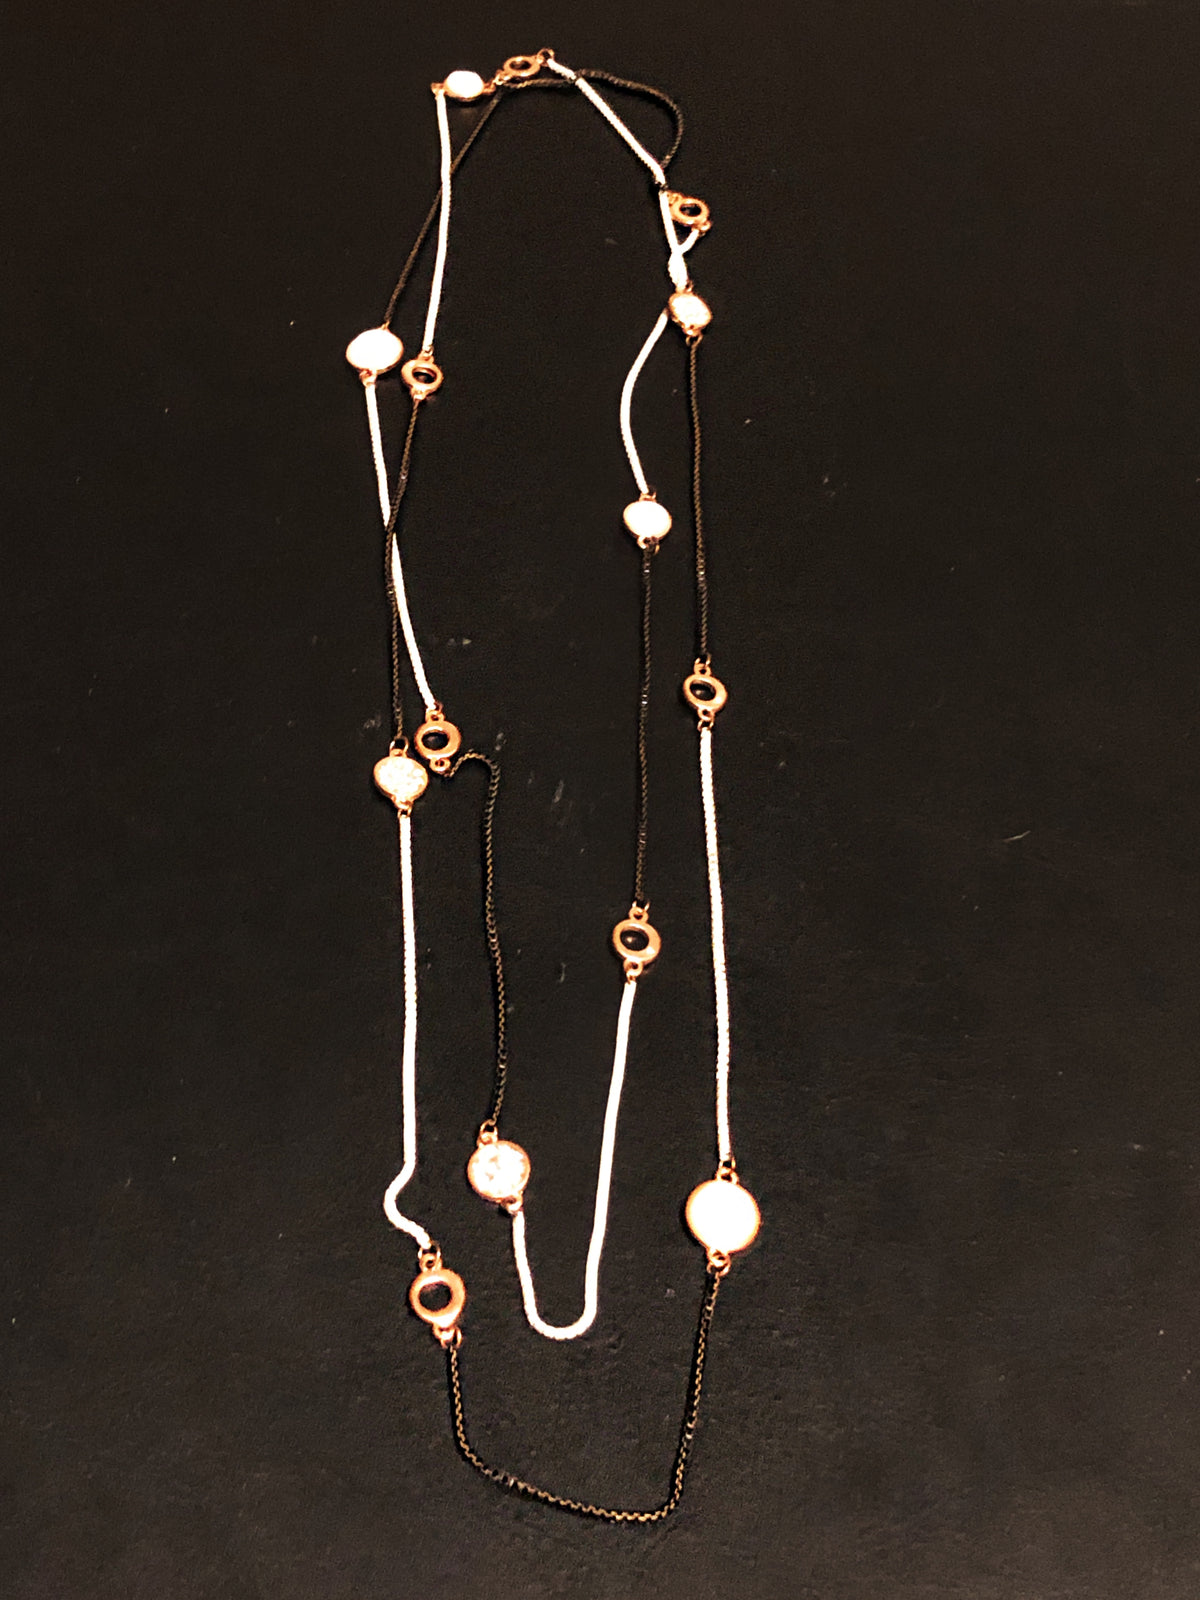 Long Necklace, Black and White with Rose Gold Design